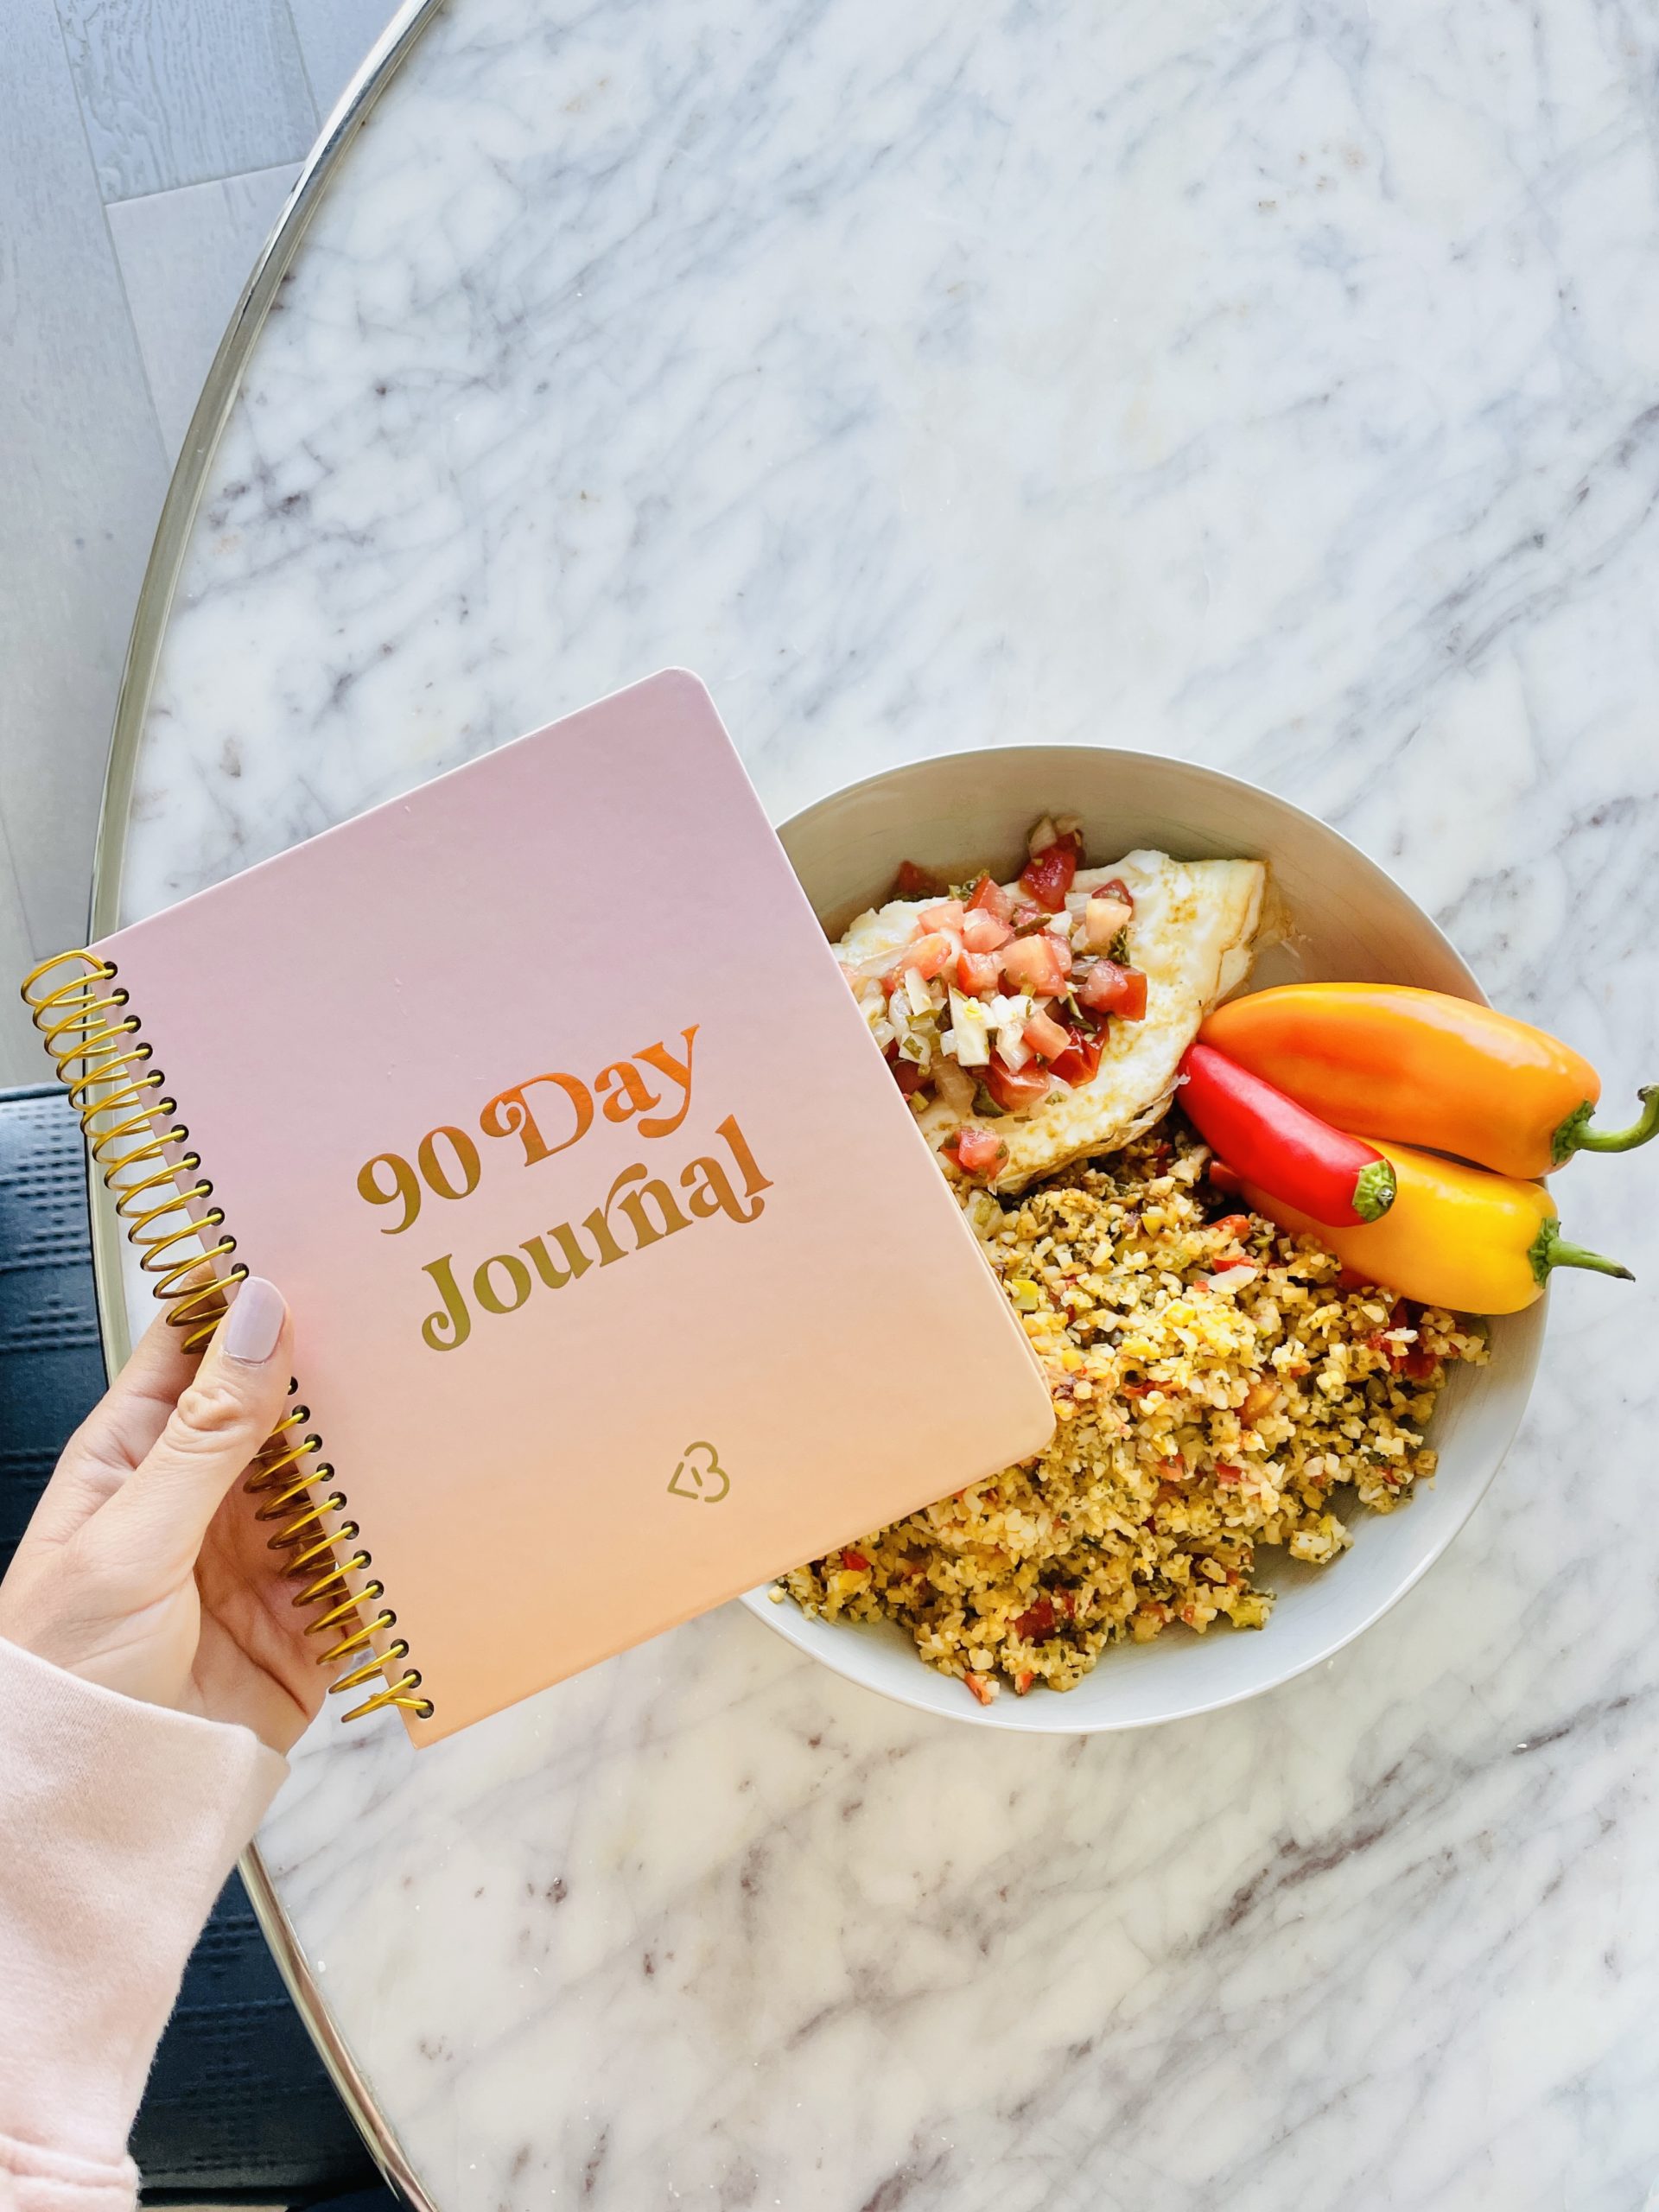 90 day journey meal plan bowl with cauliflower rice and peppers and journal cassey ho blogilates